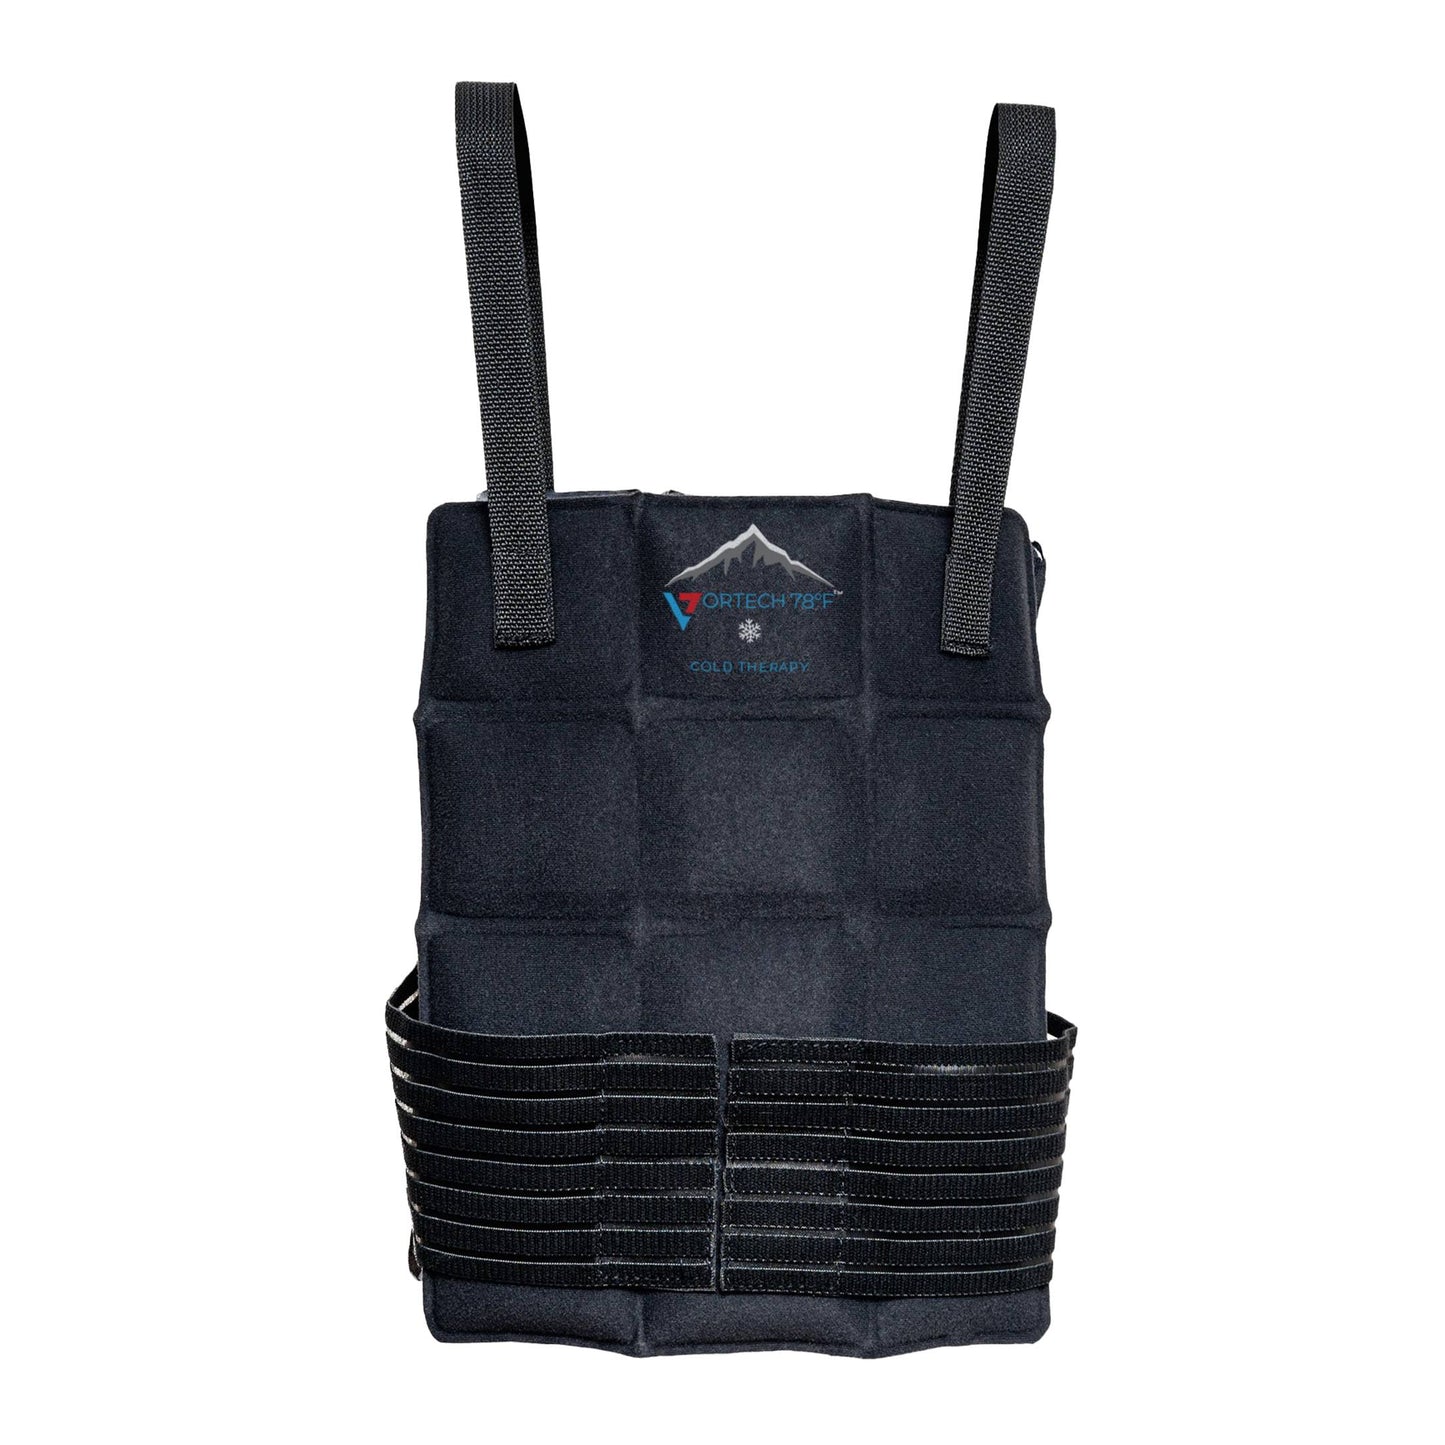 Cold Therapy Conceal Vest by Vortech